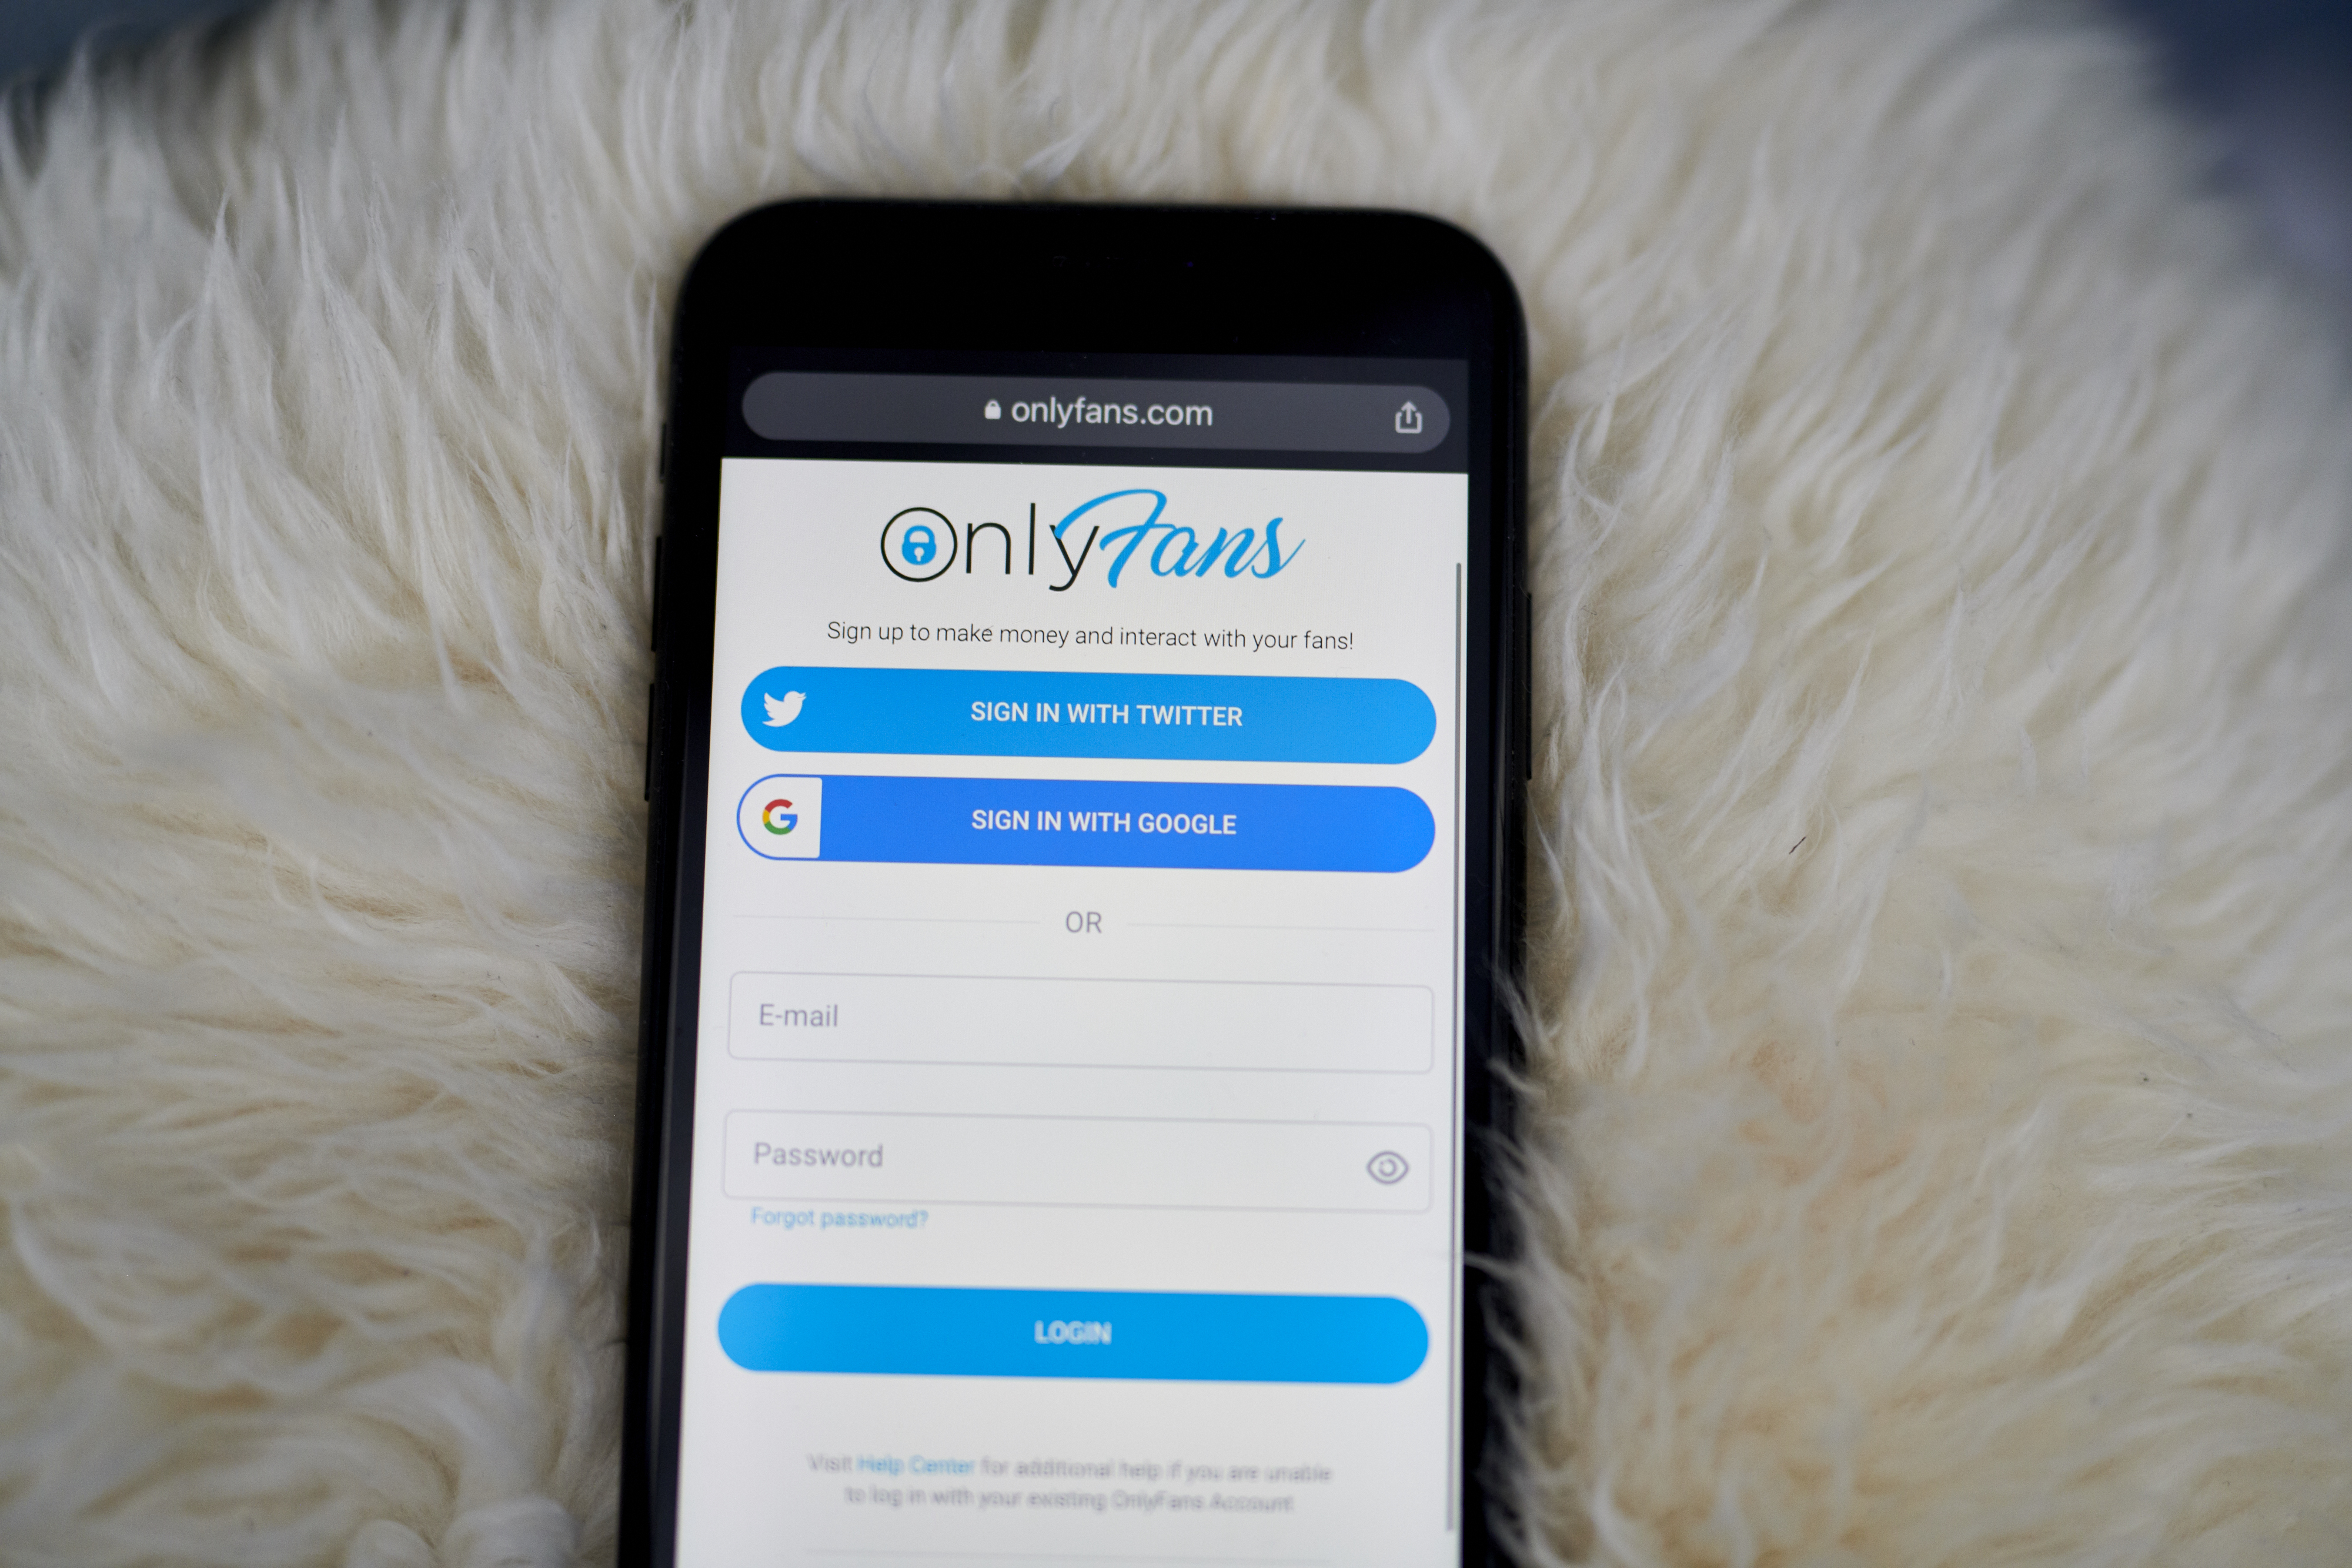 How To Work Onlyfans App